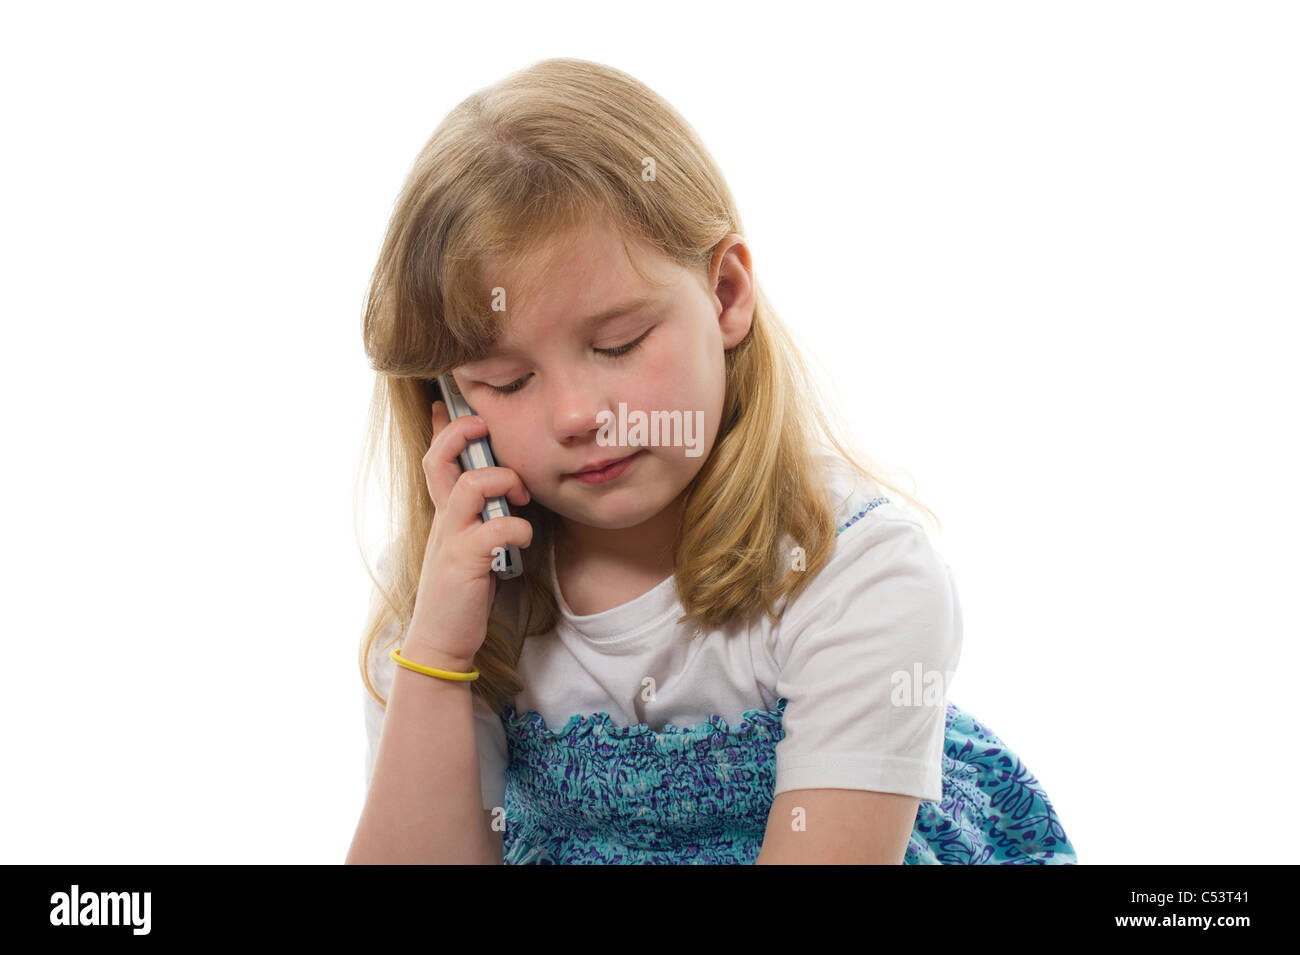 Image of young girl using a mobile phone photographed against a plain white background. Stock Photo